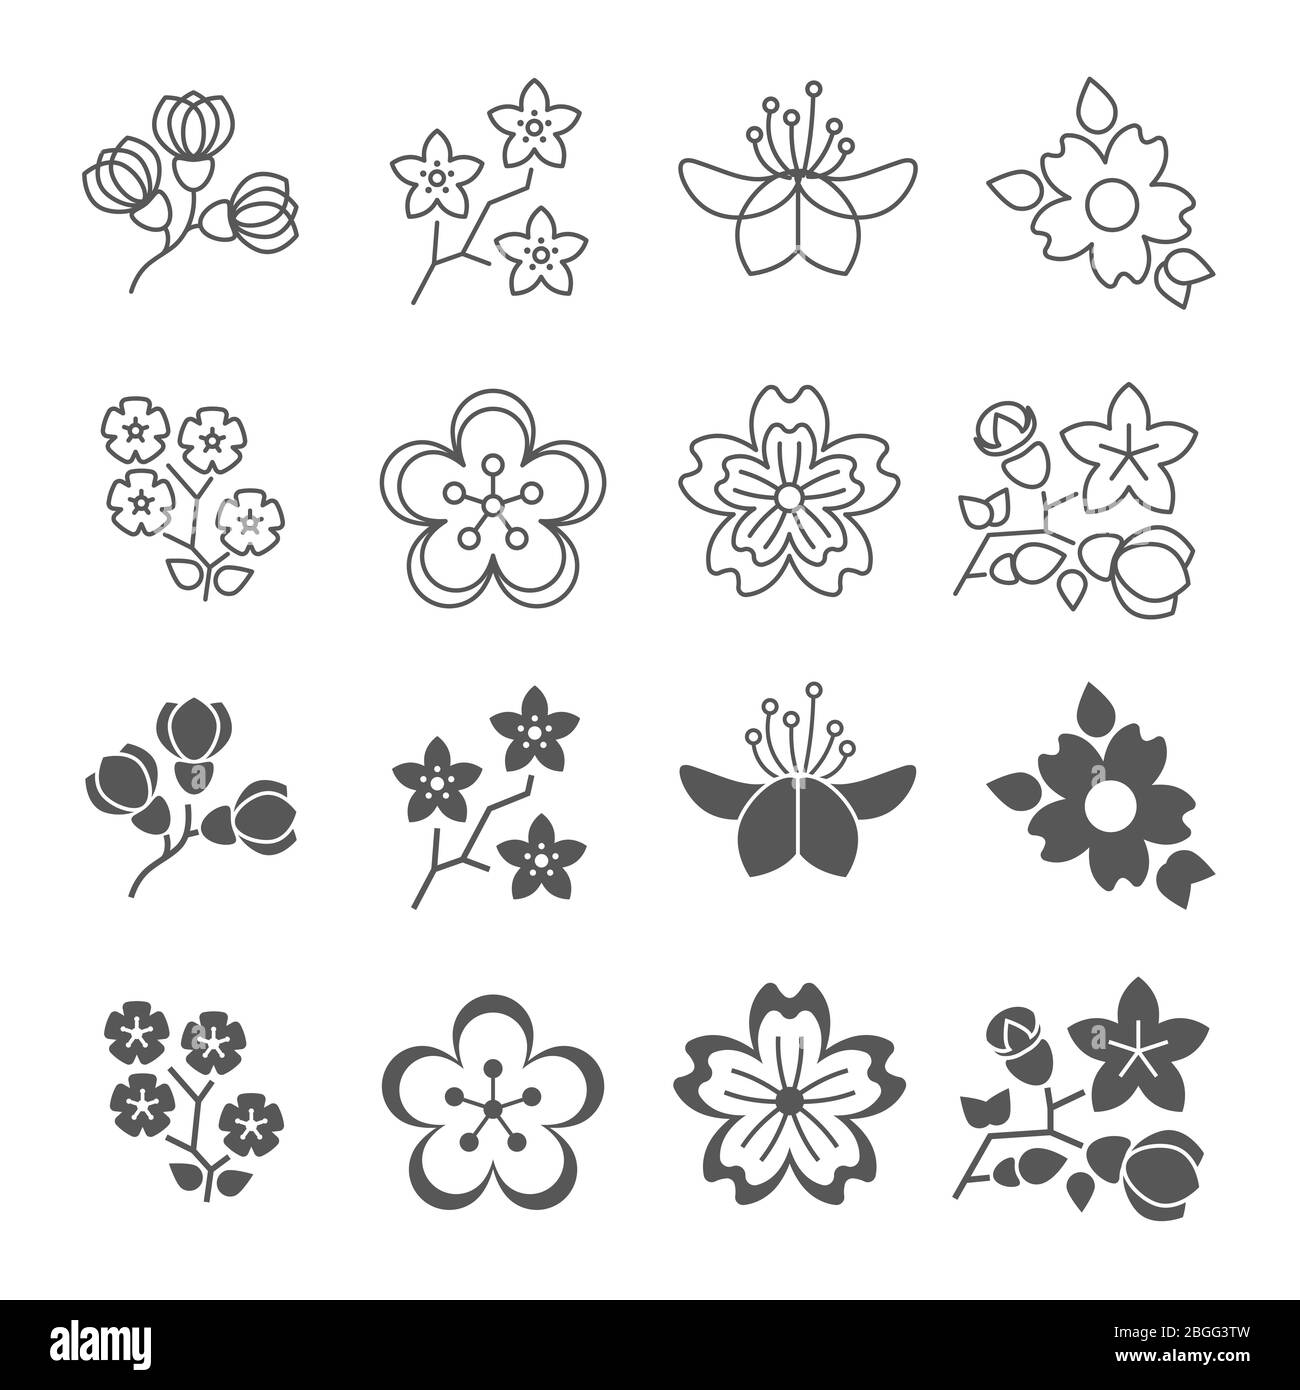 Spring blossom flowers line and silhouette icons set. Blossom plant flower spring, floral nature bloom, vector illustration Stock Vector